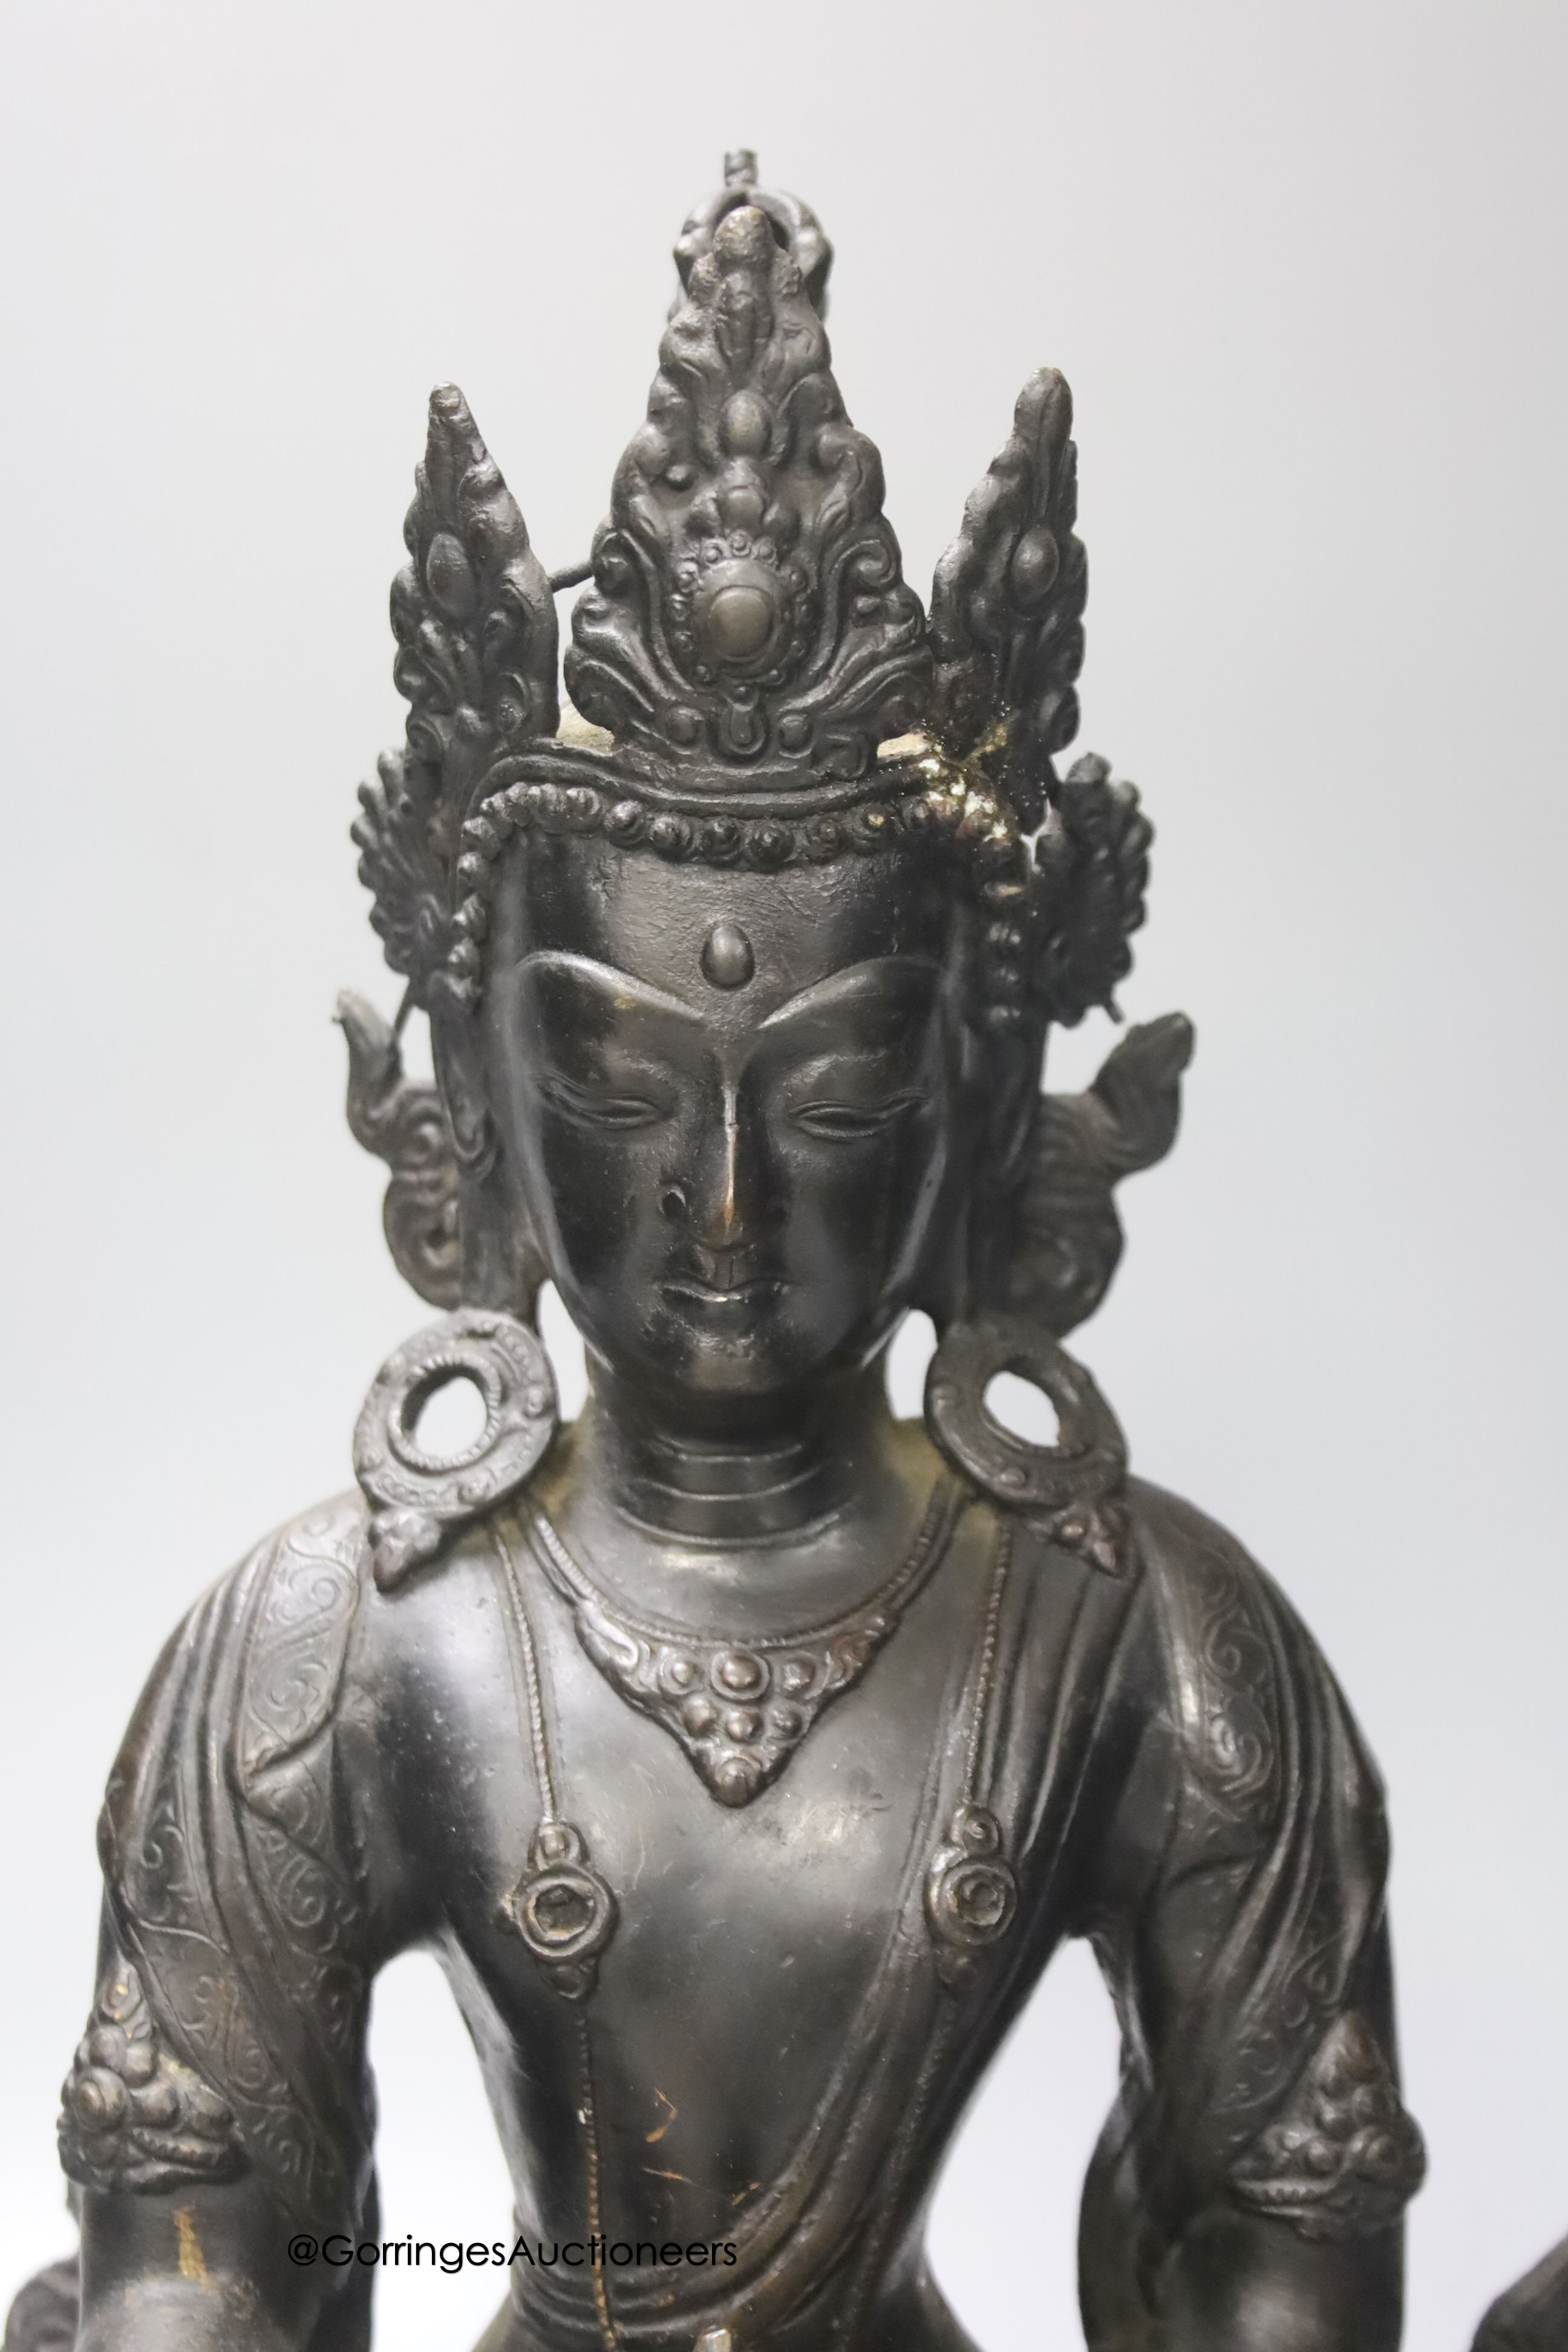 A bronze figure of a Bodhisattva, seated on an oval lotus base, 36cm